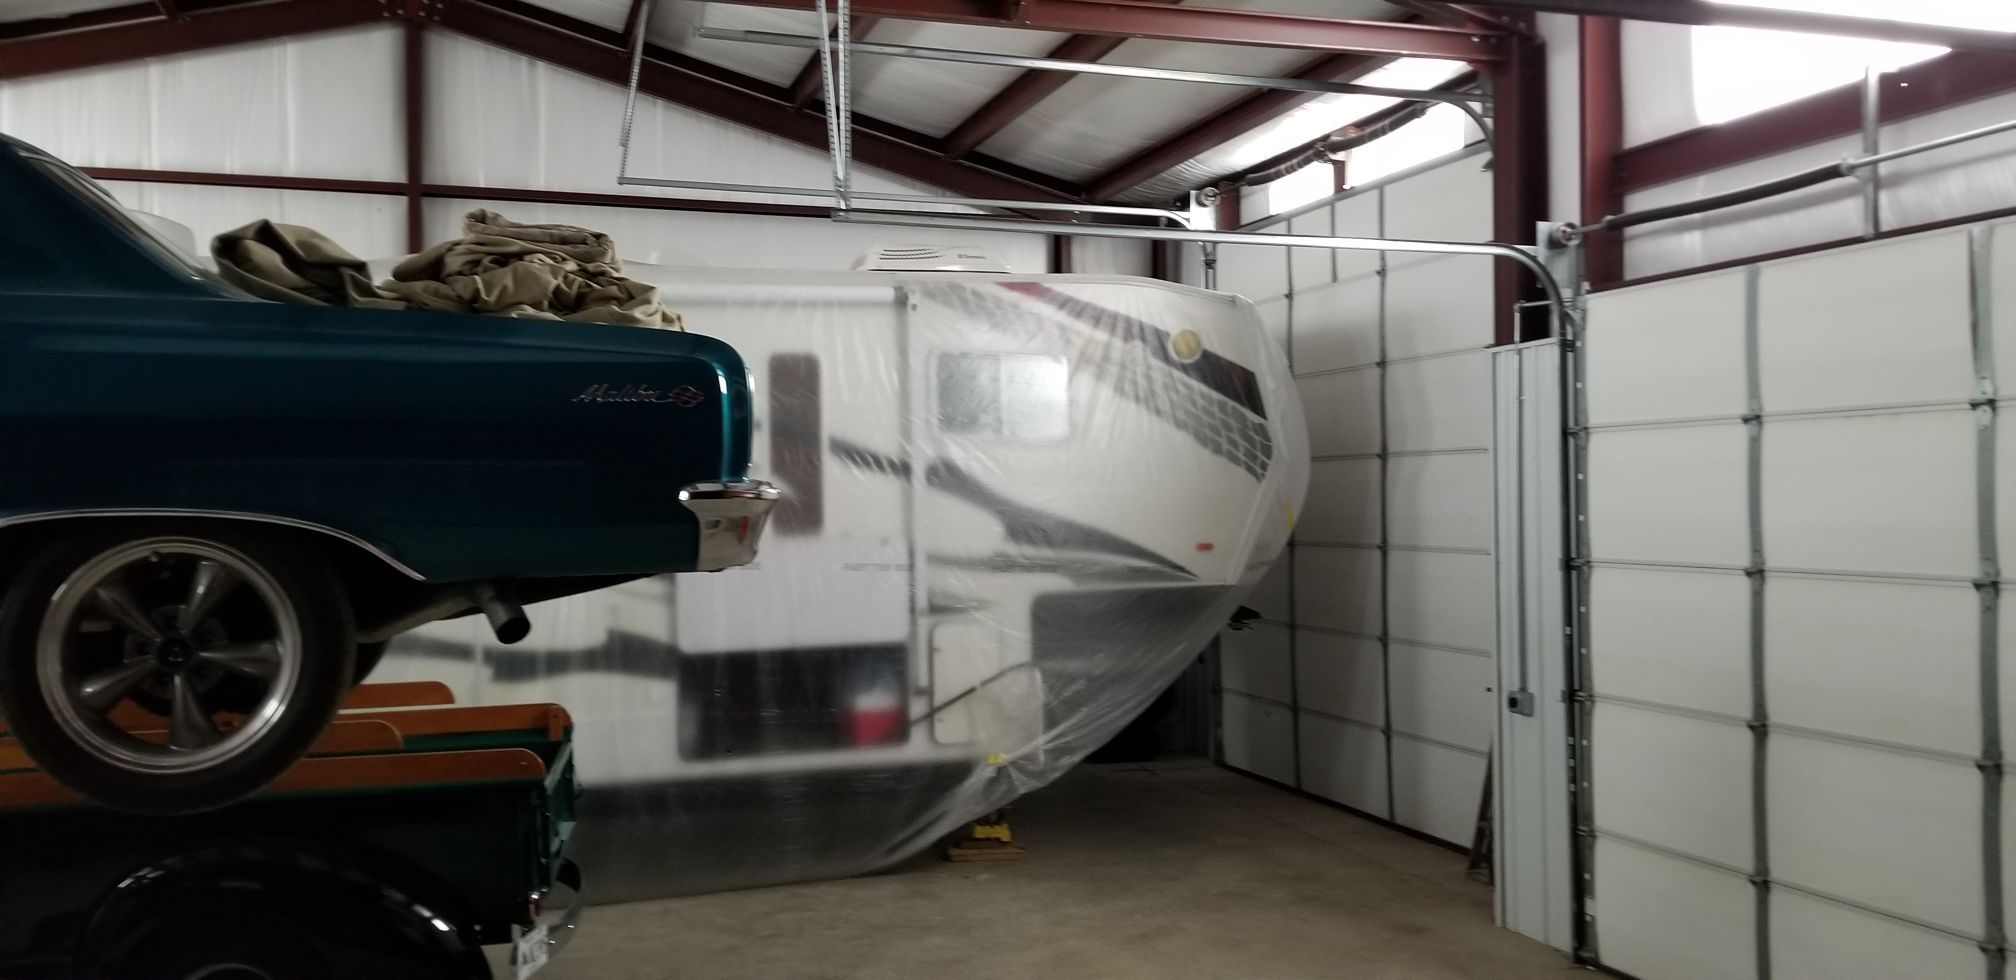 Garage Interior with Cars and Camper